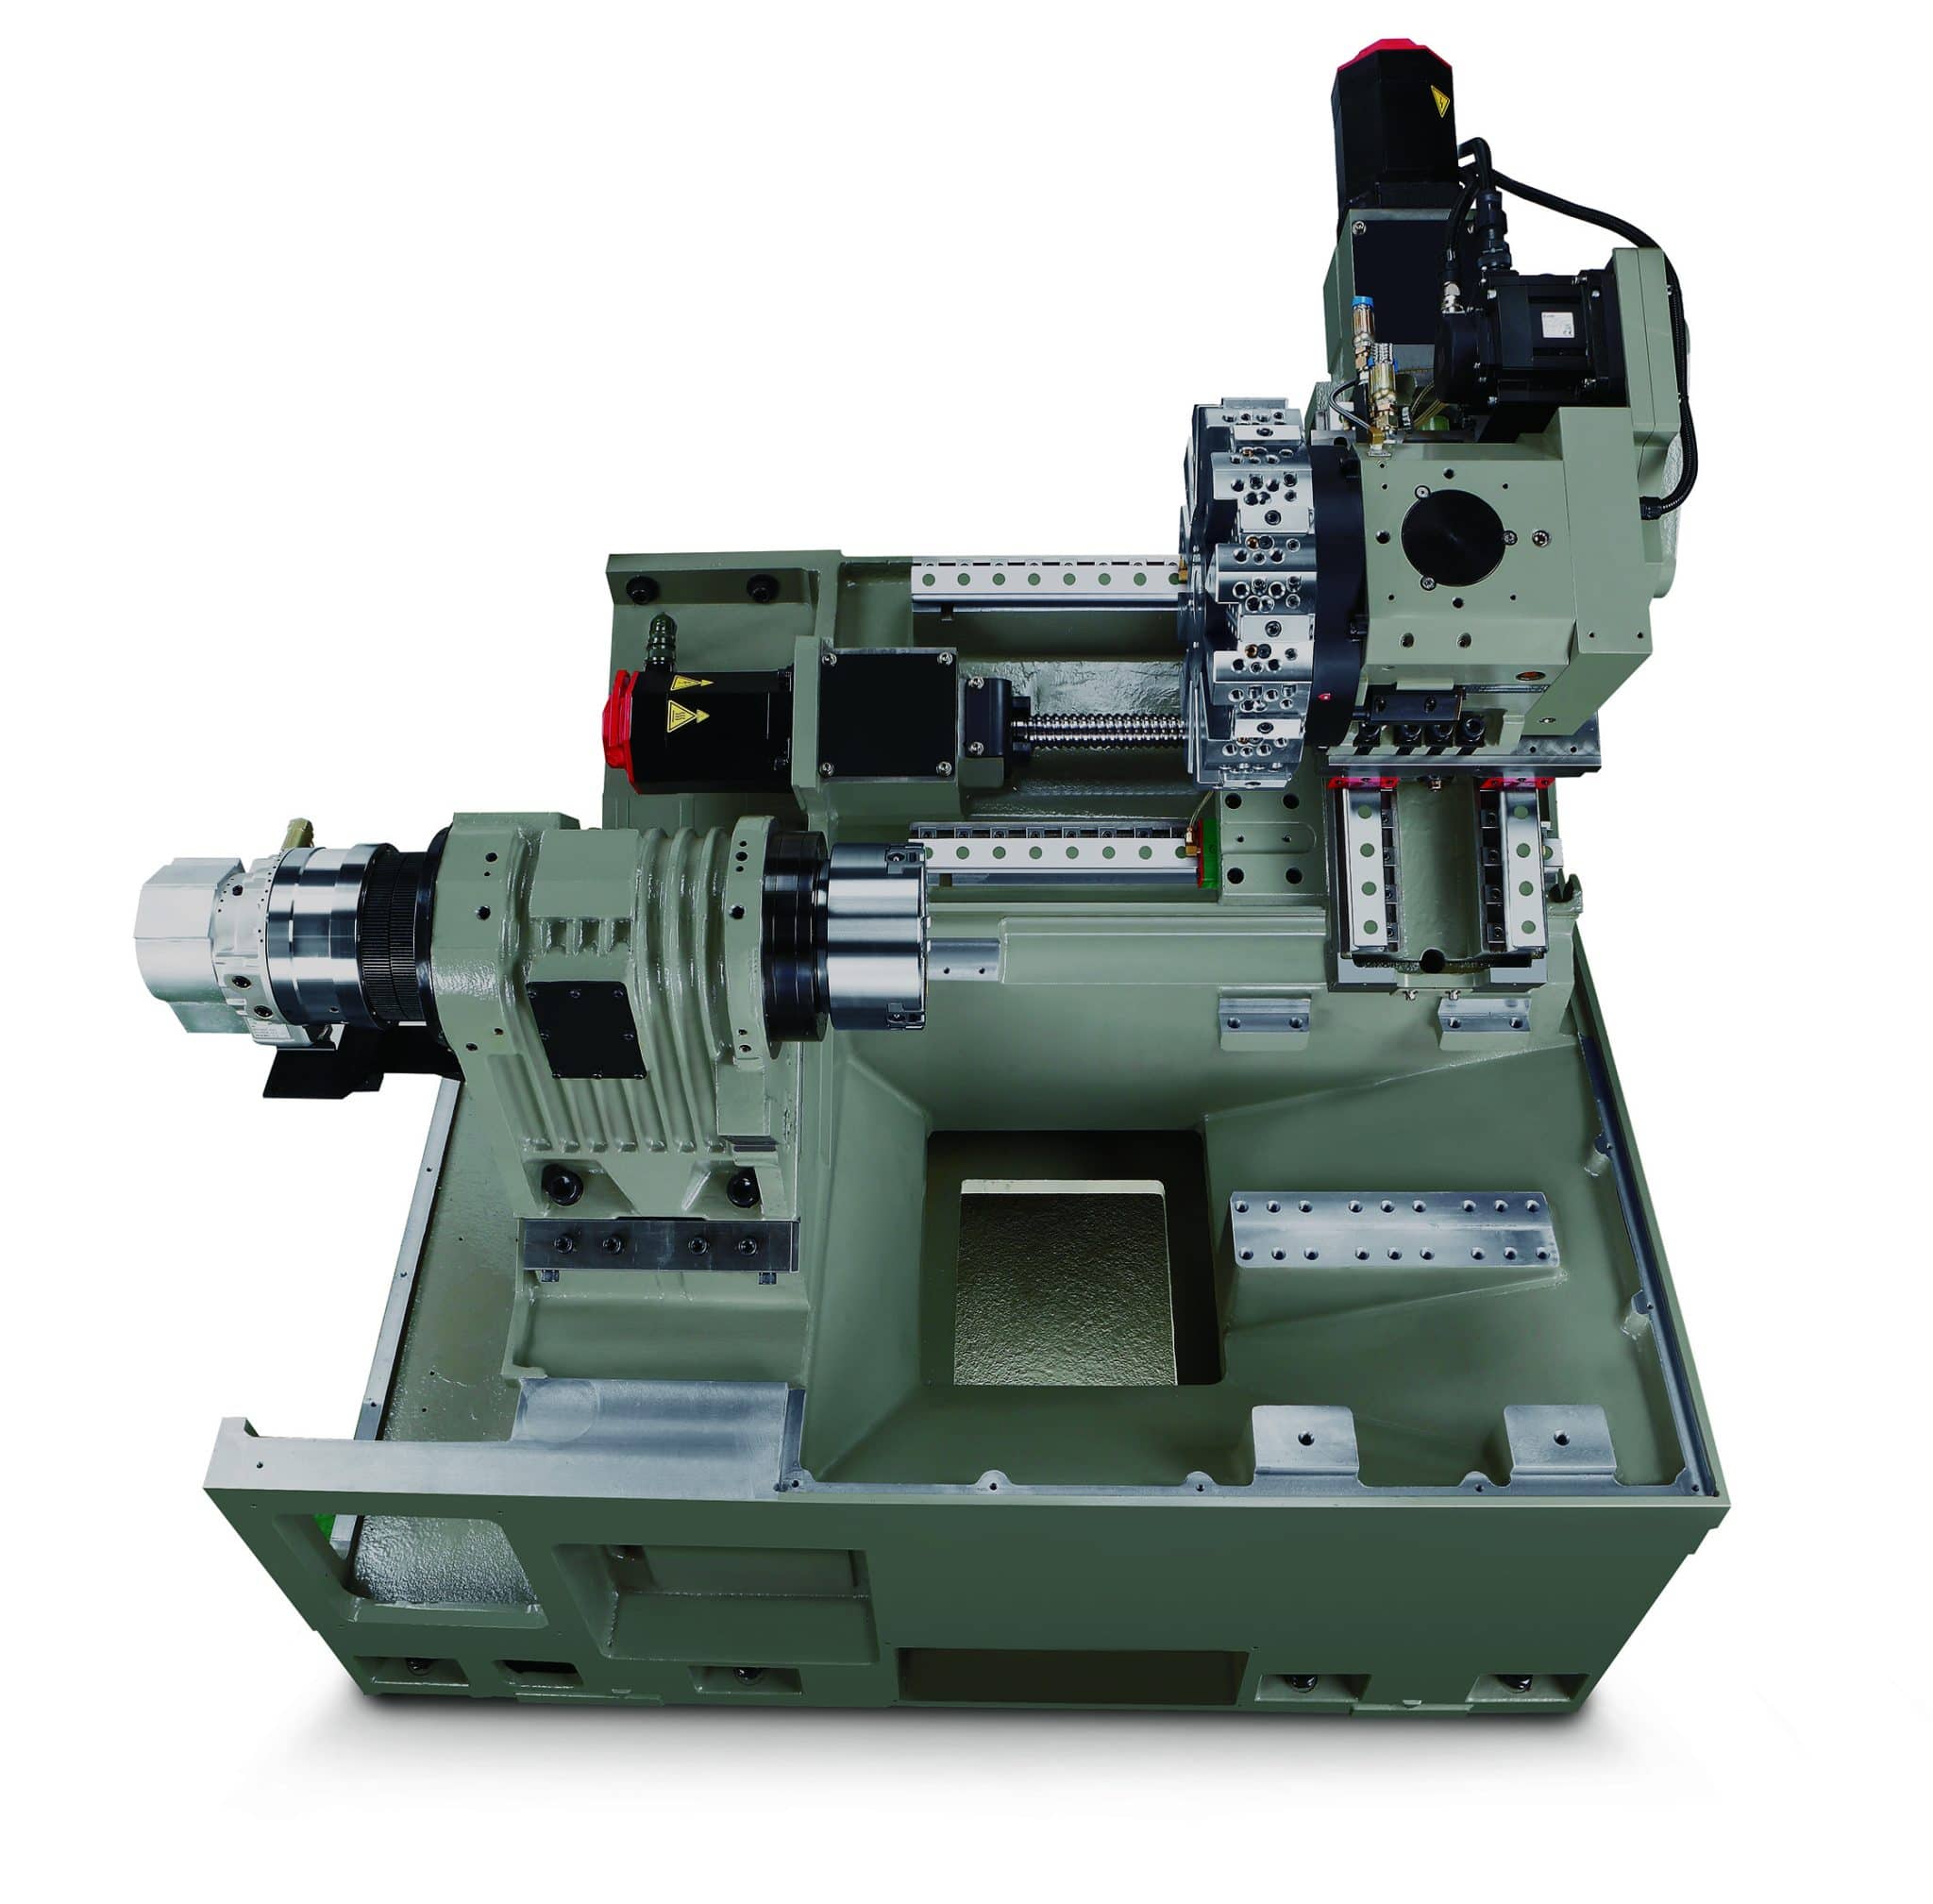 Machine outil OR VT NP16 without guarding